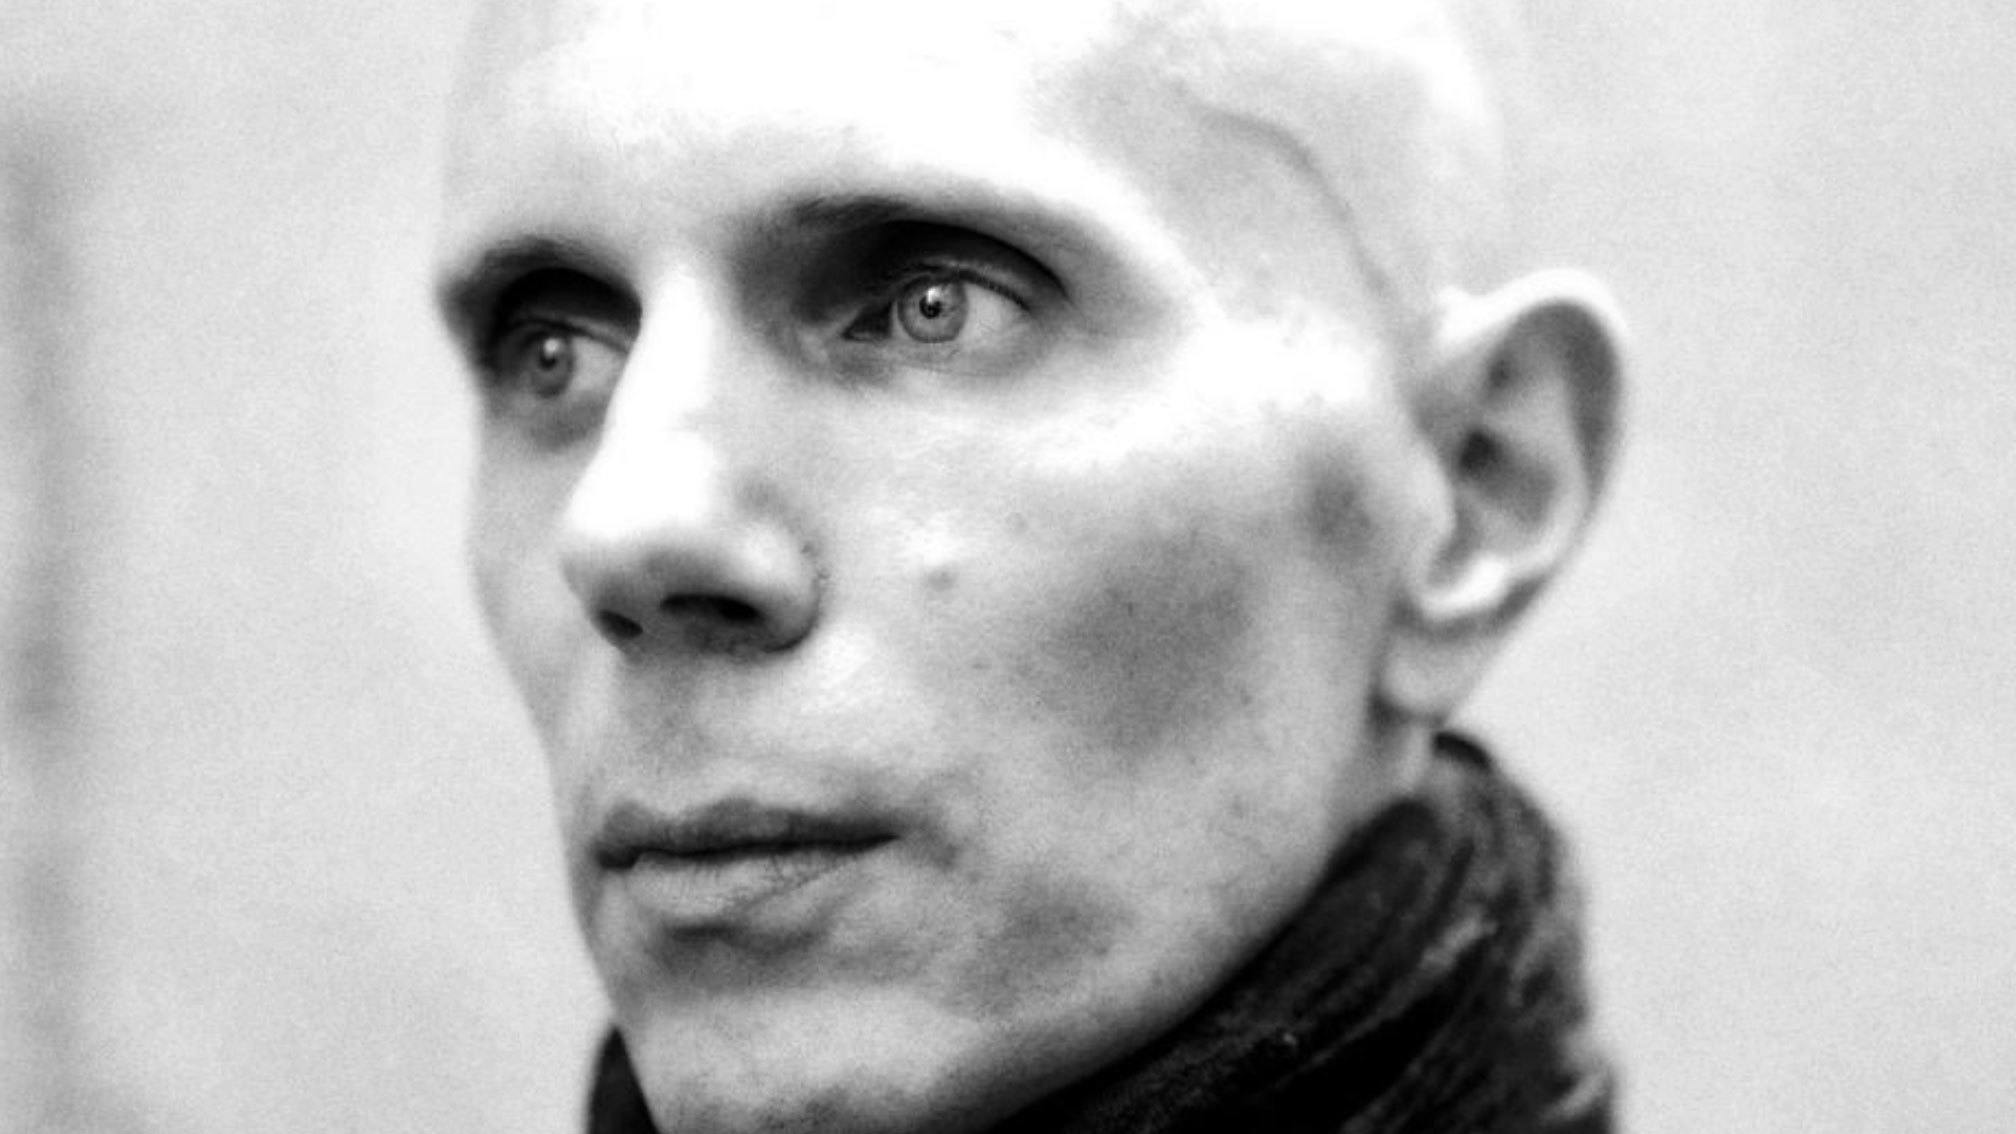 Billy Howerdel: The 10 songs that changed my life